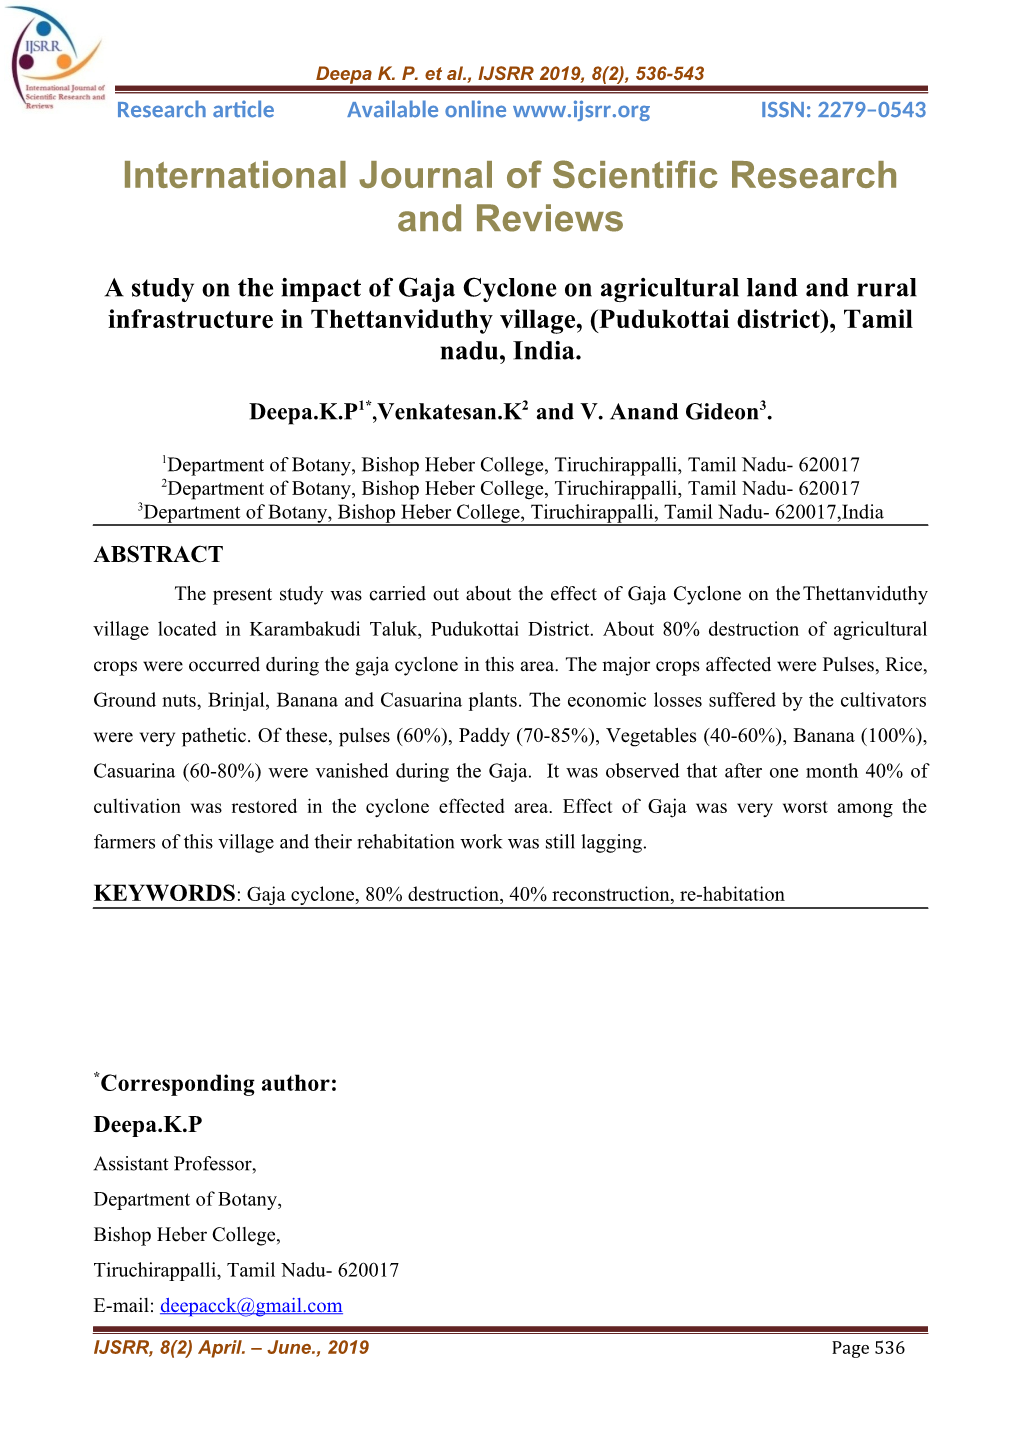 A Study on the Impact of Gaja Cyclone on Agricultural Land and Rural Infrastructure in Thettanviduthy Village, (Pudukottai District), Tamil Nadu, India